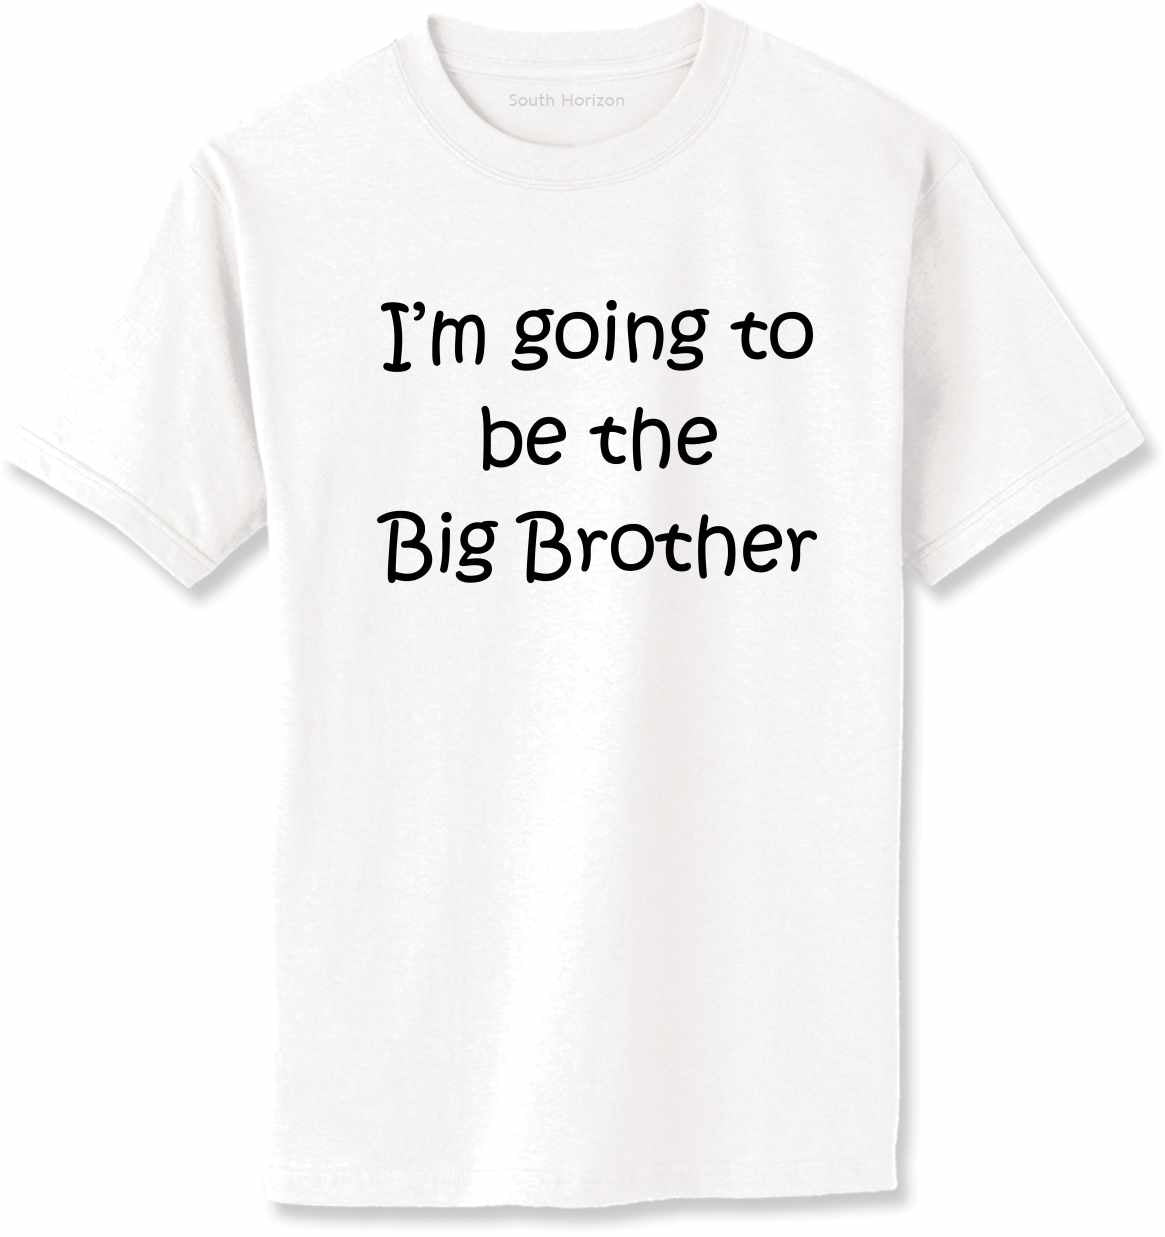 I'M GOING TO BE THE BIG BROTHER Adult T-Shirt (#518-1)